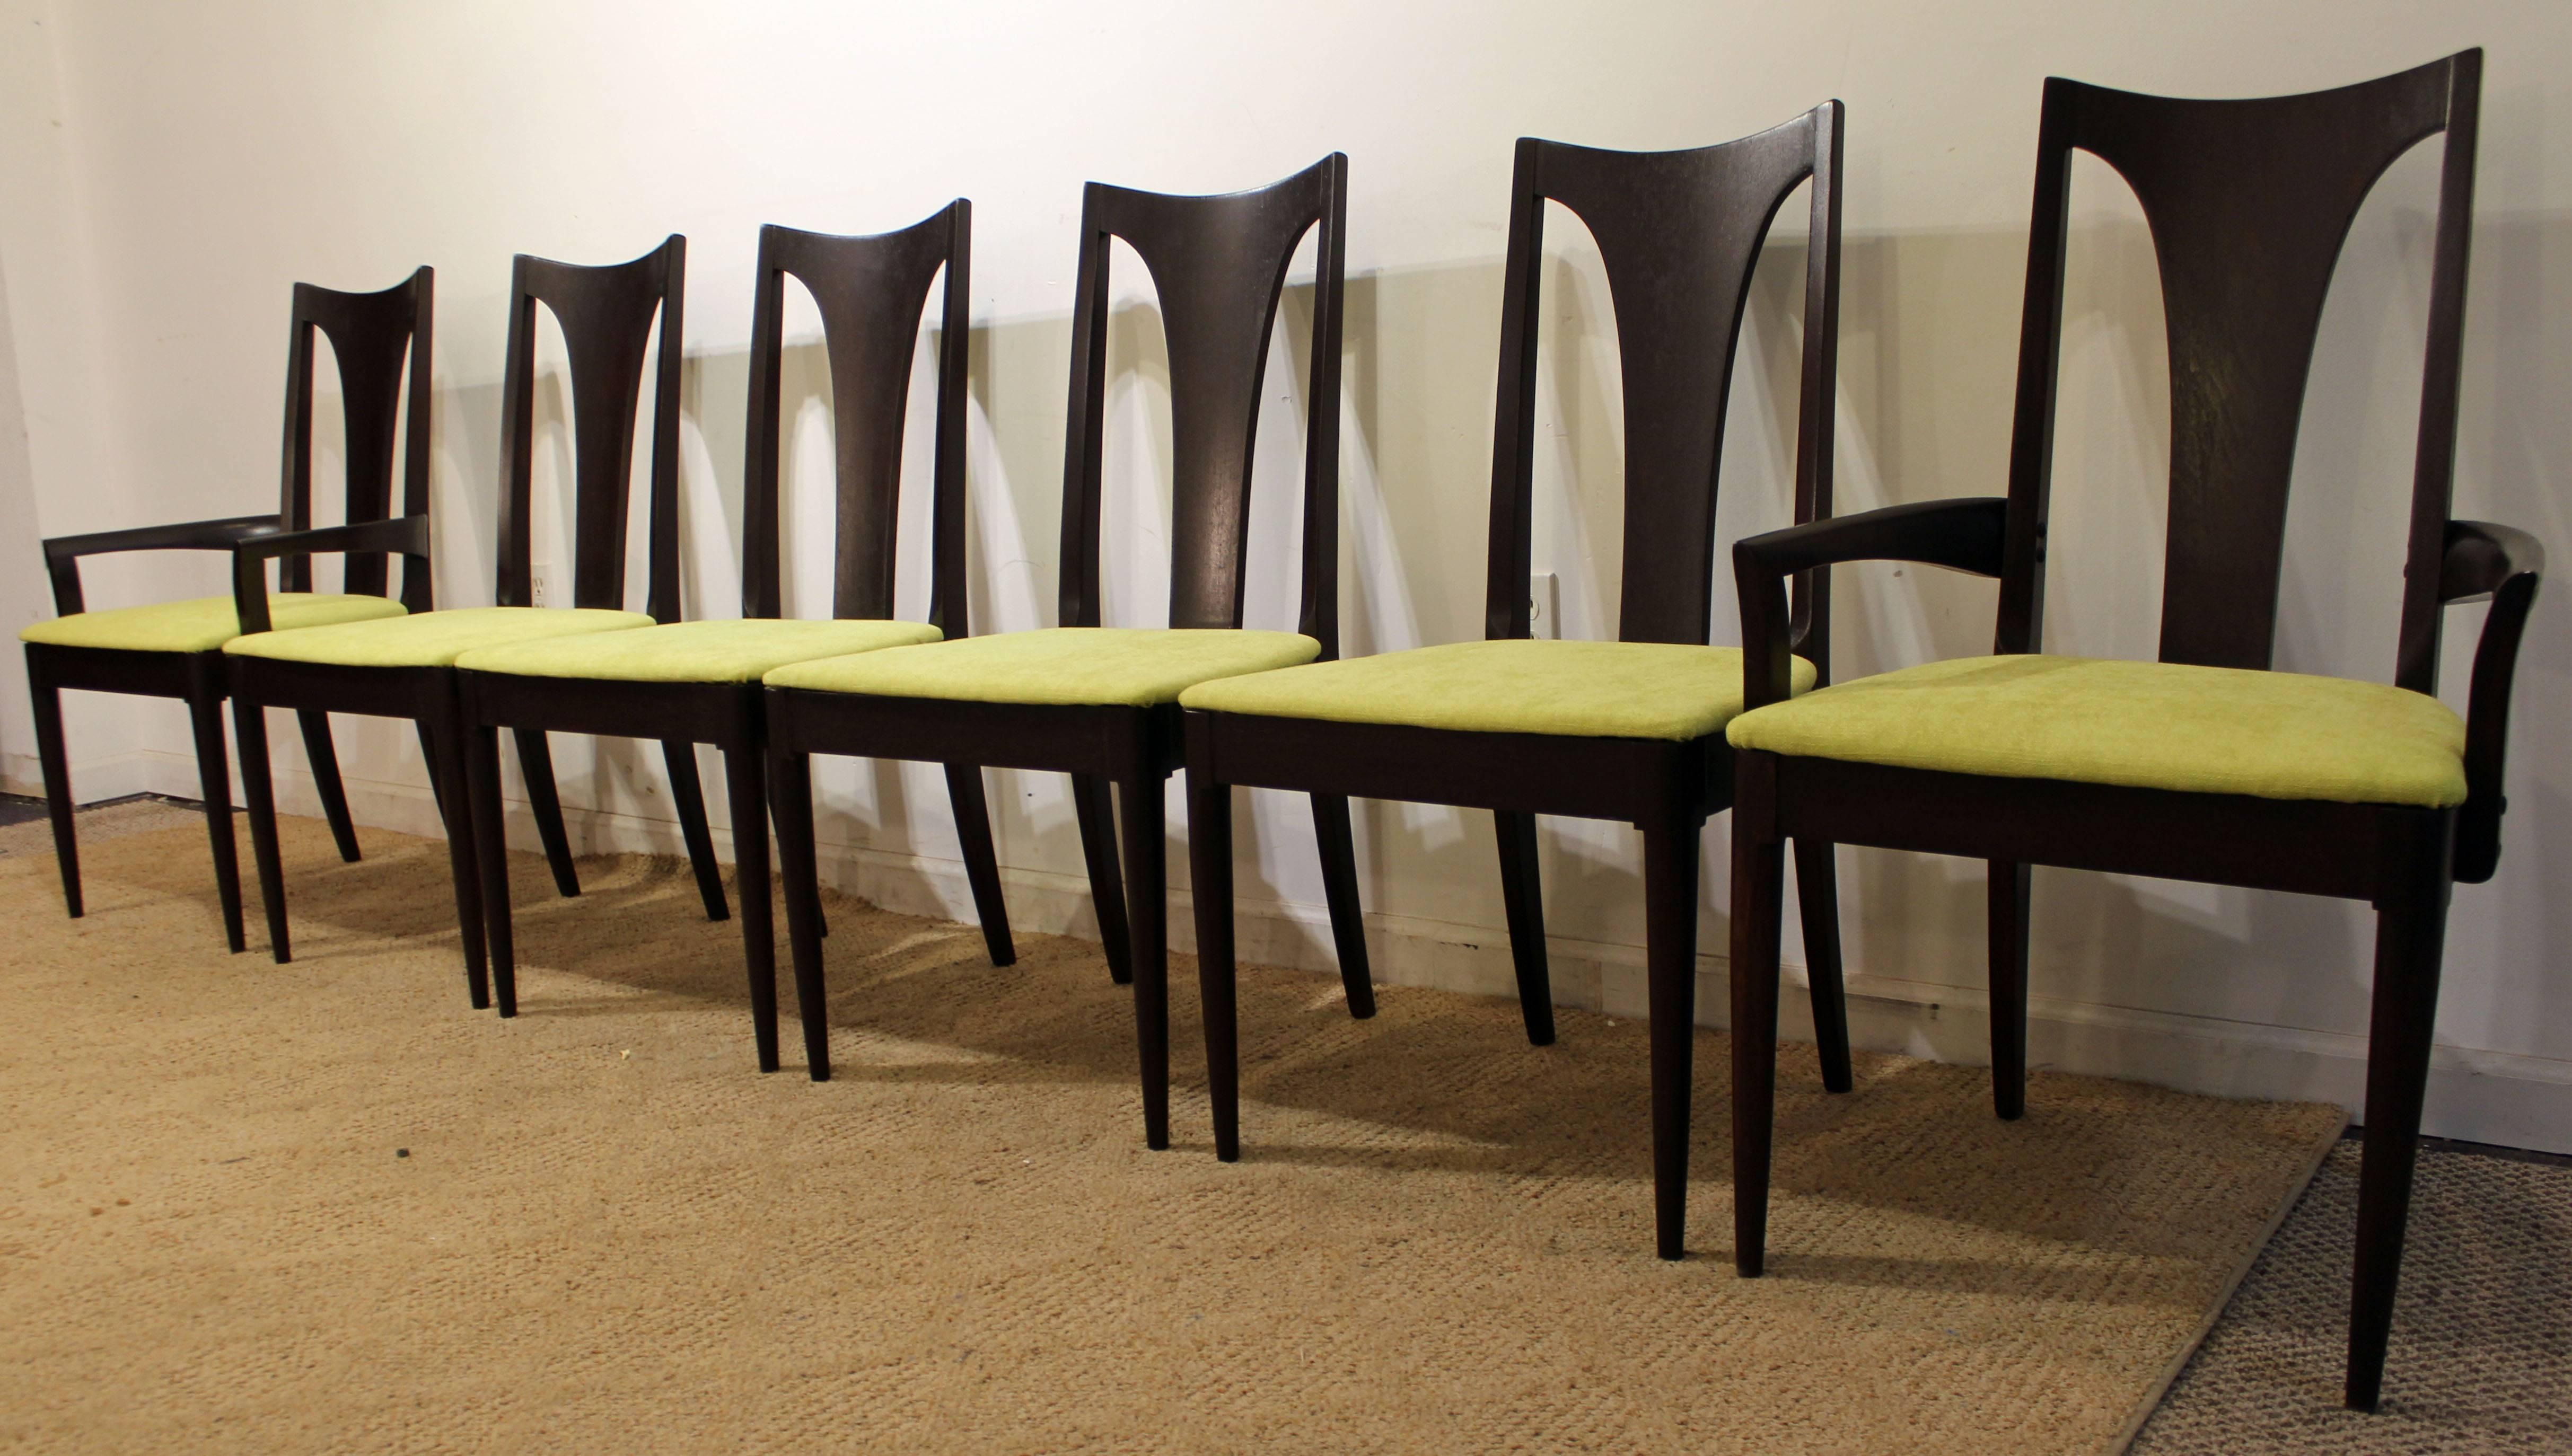 Offered is a set of six dining chairs by Broyhill Brasilia. This set includes four side chairs and two arm chairs. They have been refinished with a dark walnut stain and have been reupholstered with 'Citron' fabric.

Approximate dimensions:
Arm